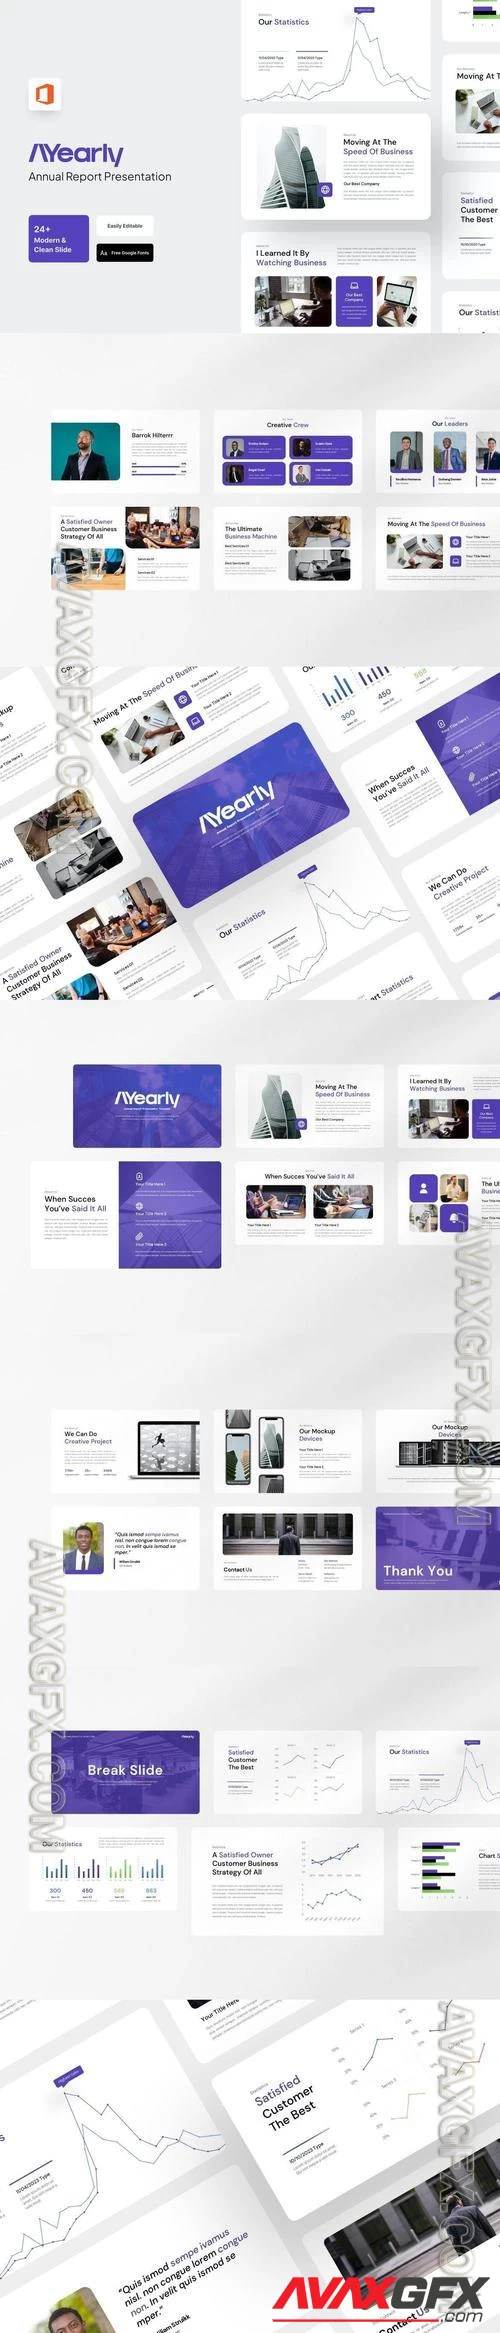 Ayearly - Annual Report PowerPoint, Keynote and Google Slides Presentations